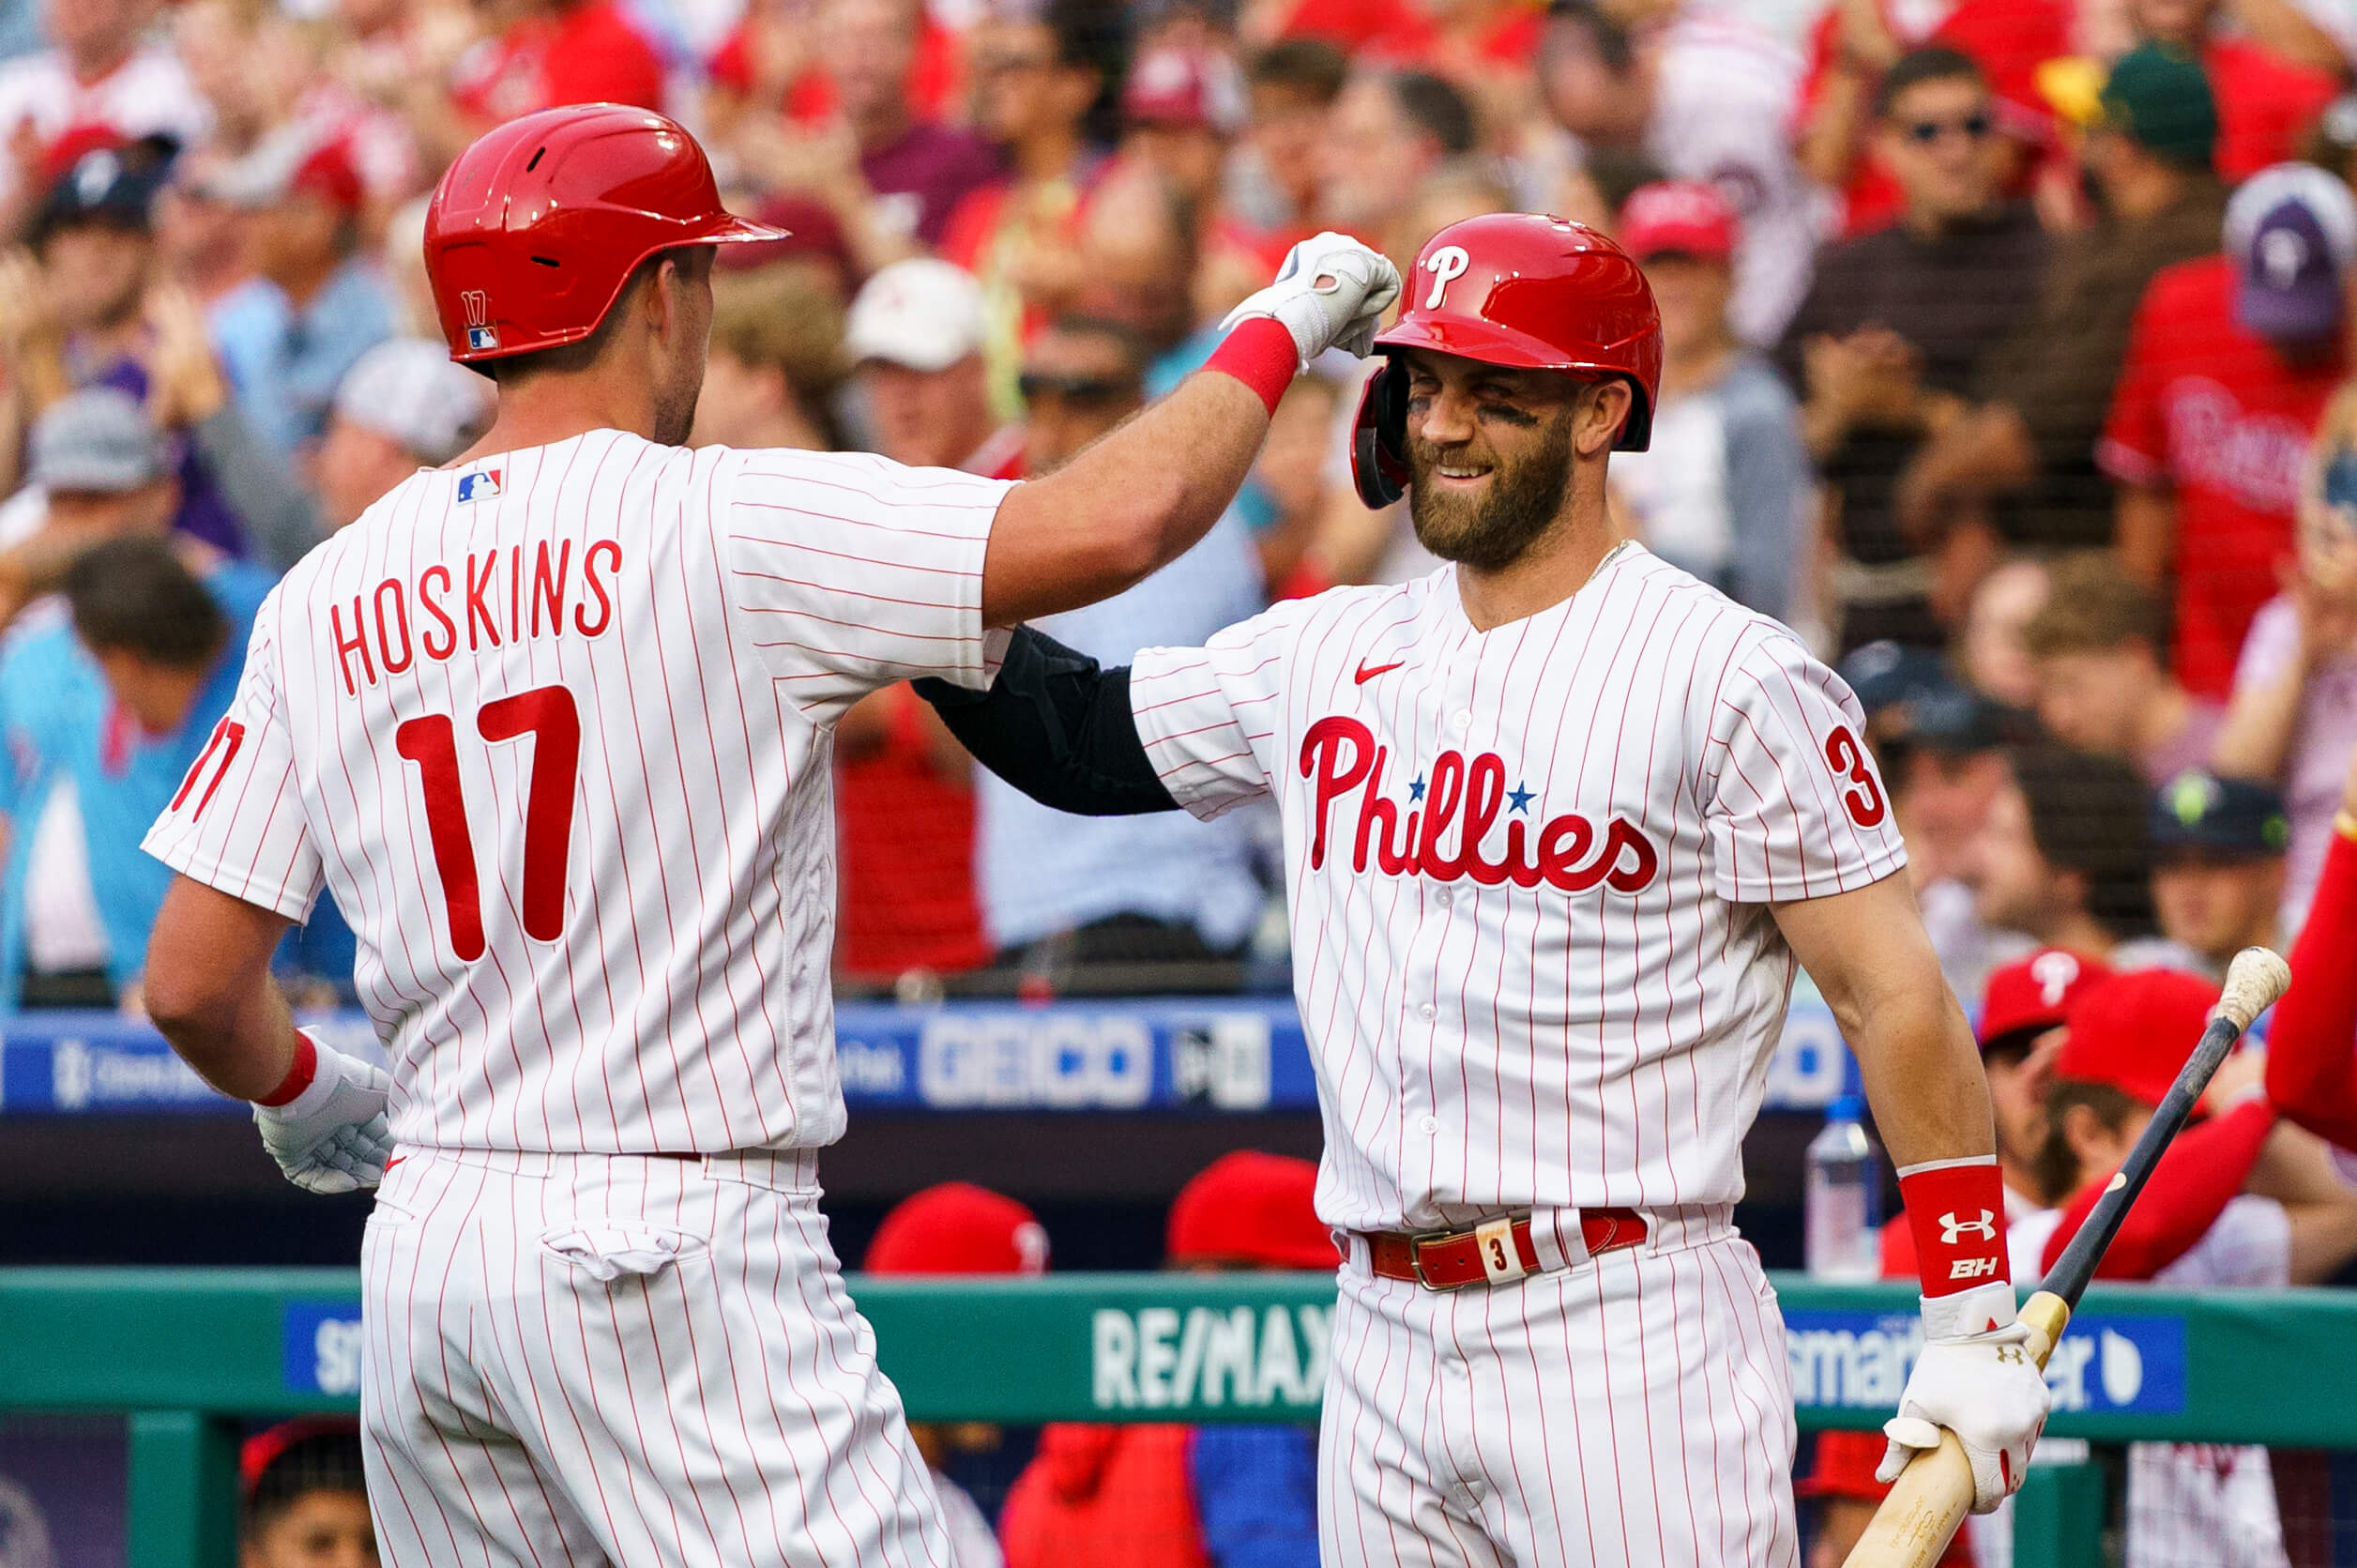 The Phillies' summer hot streak by the numbers